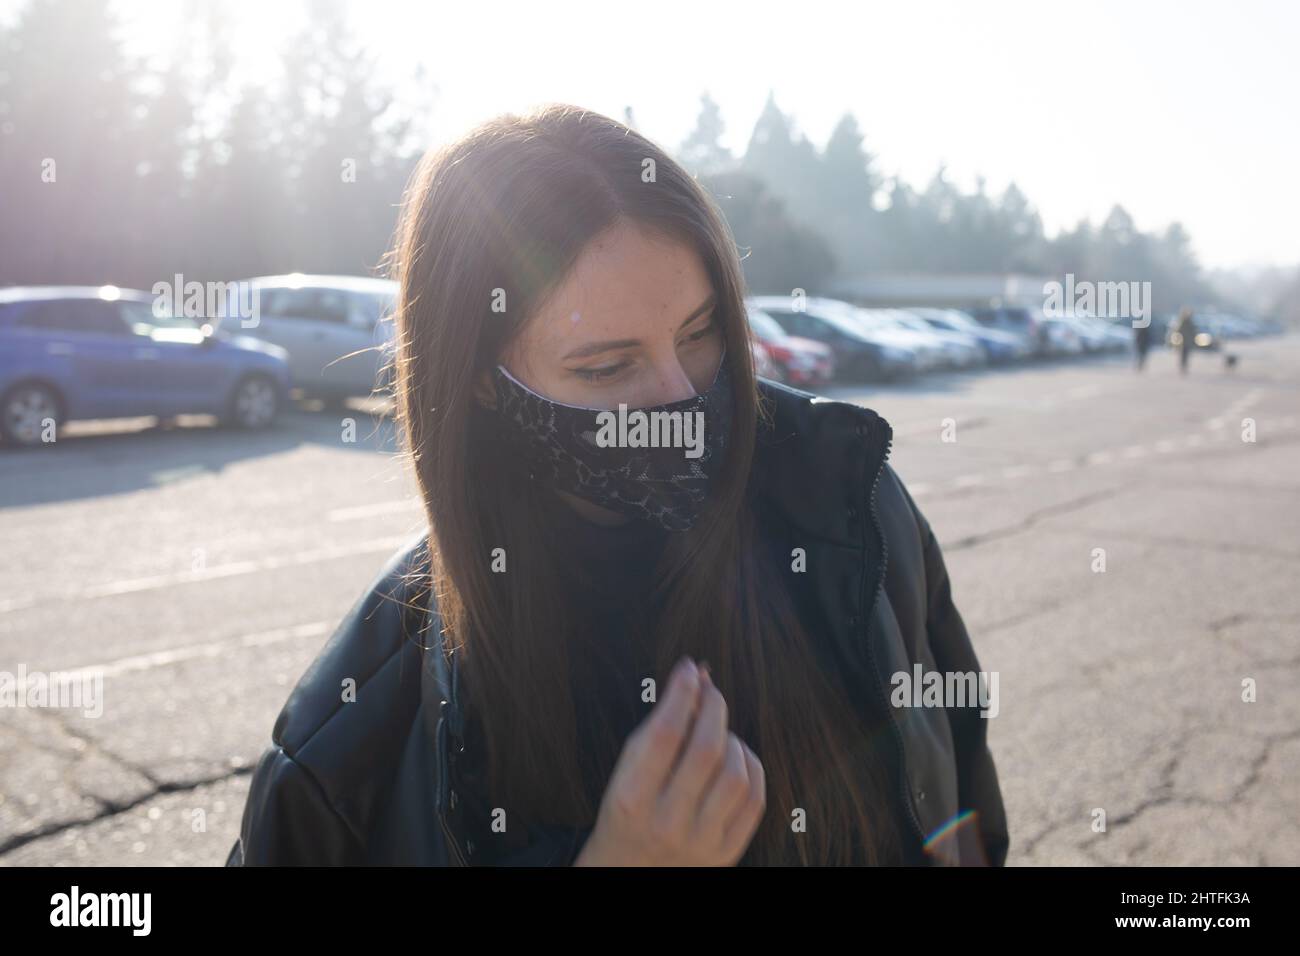 girl wearing mask outside on parking during pandemic covid-19 Stock Photo